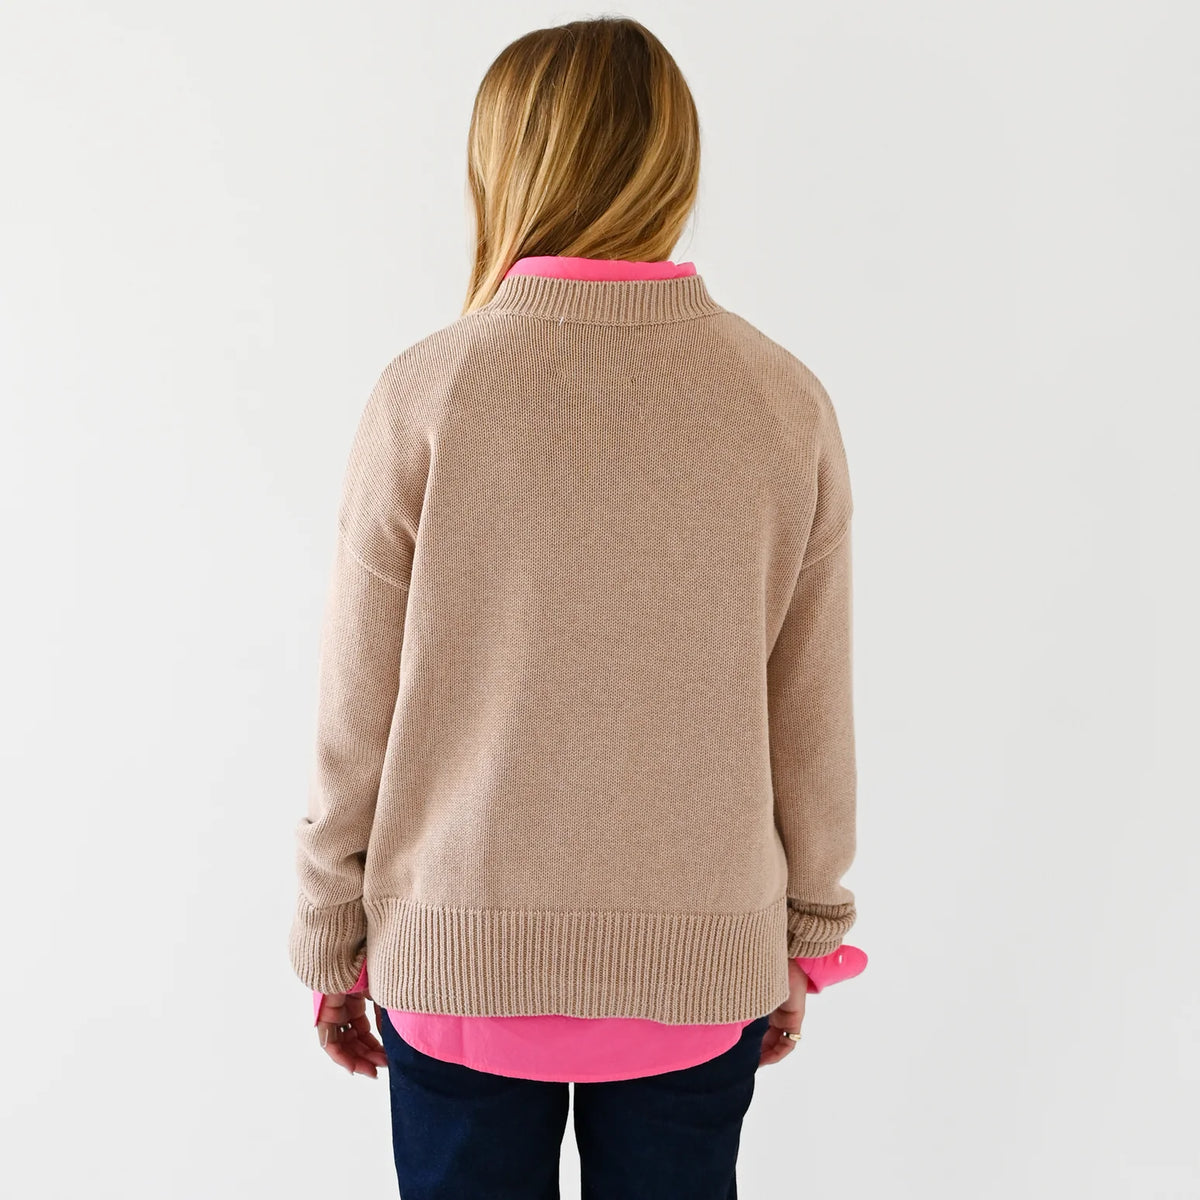 Benton Sweater - Imperfect Heart - Taupe